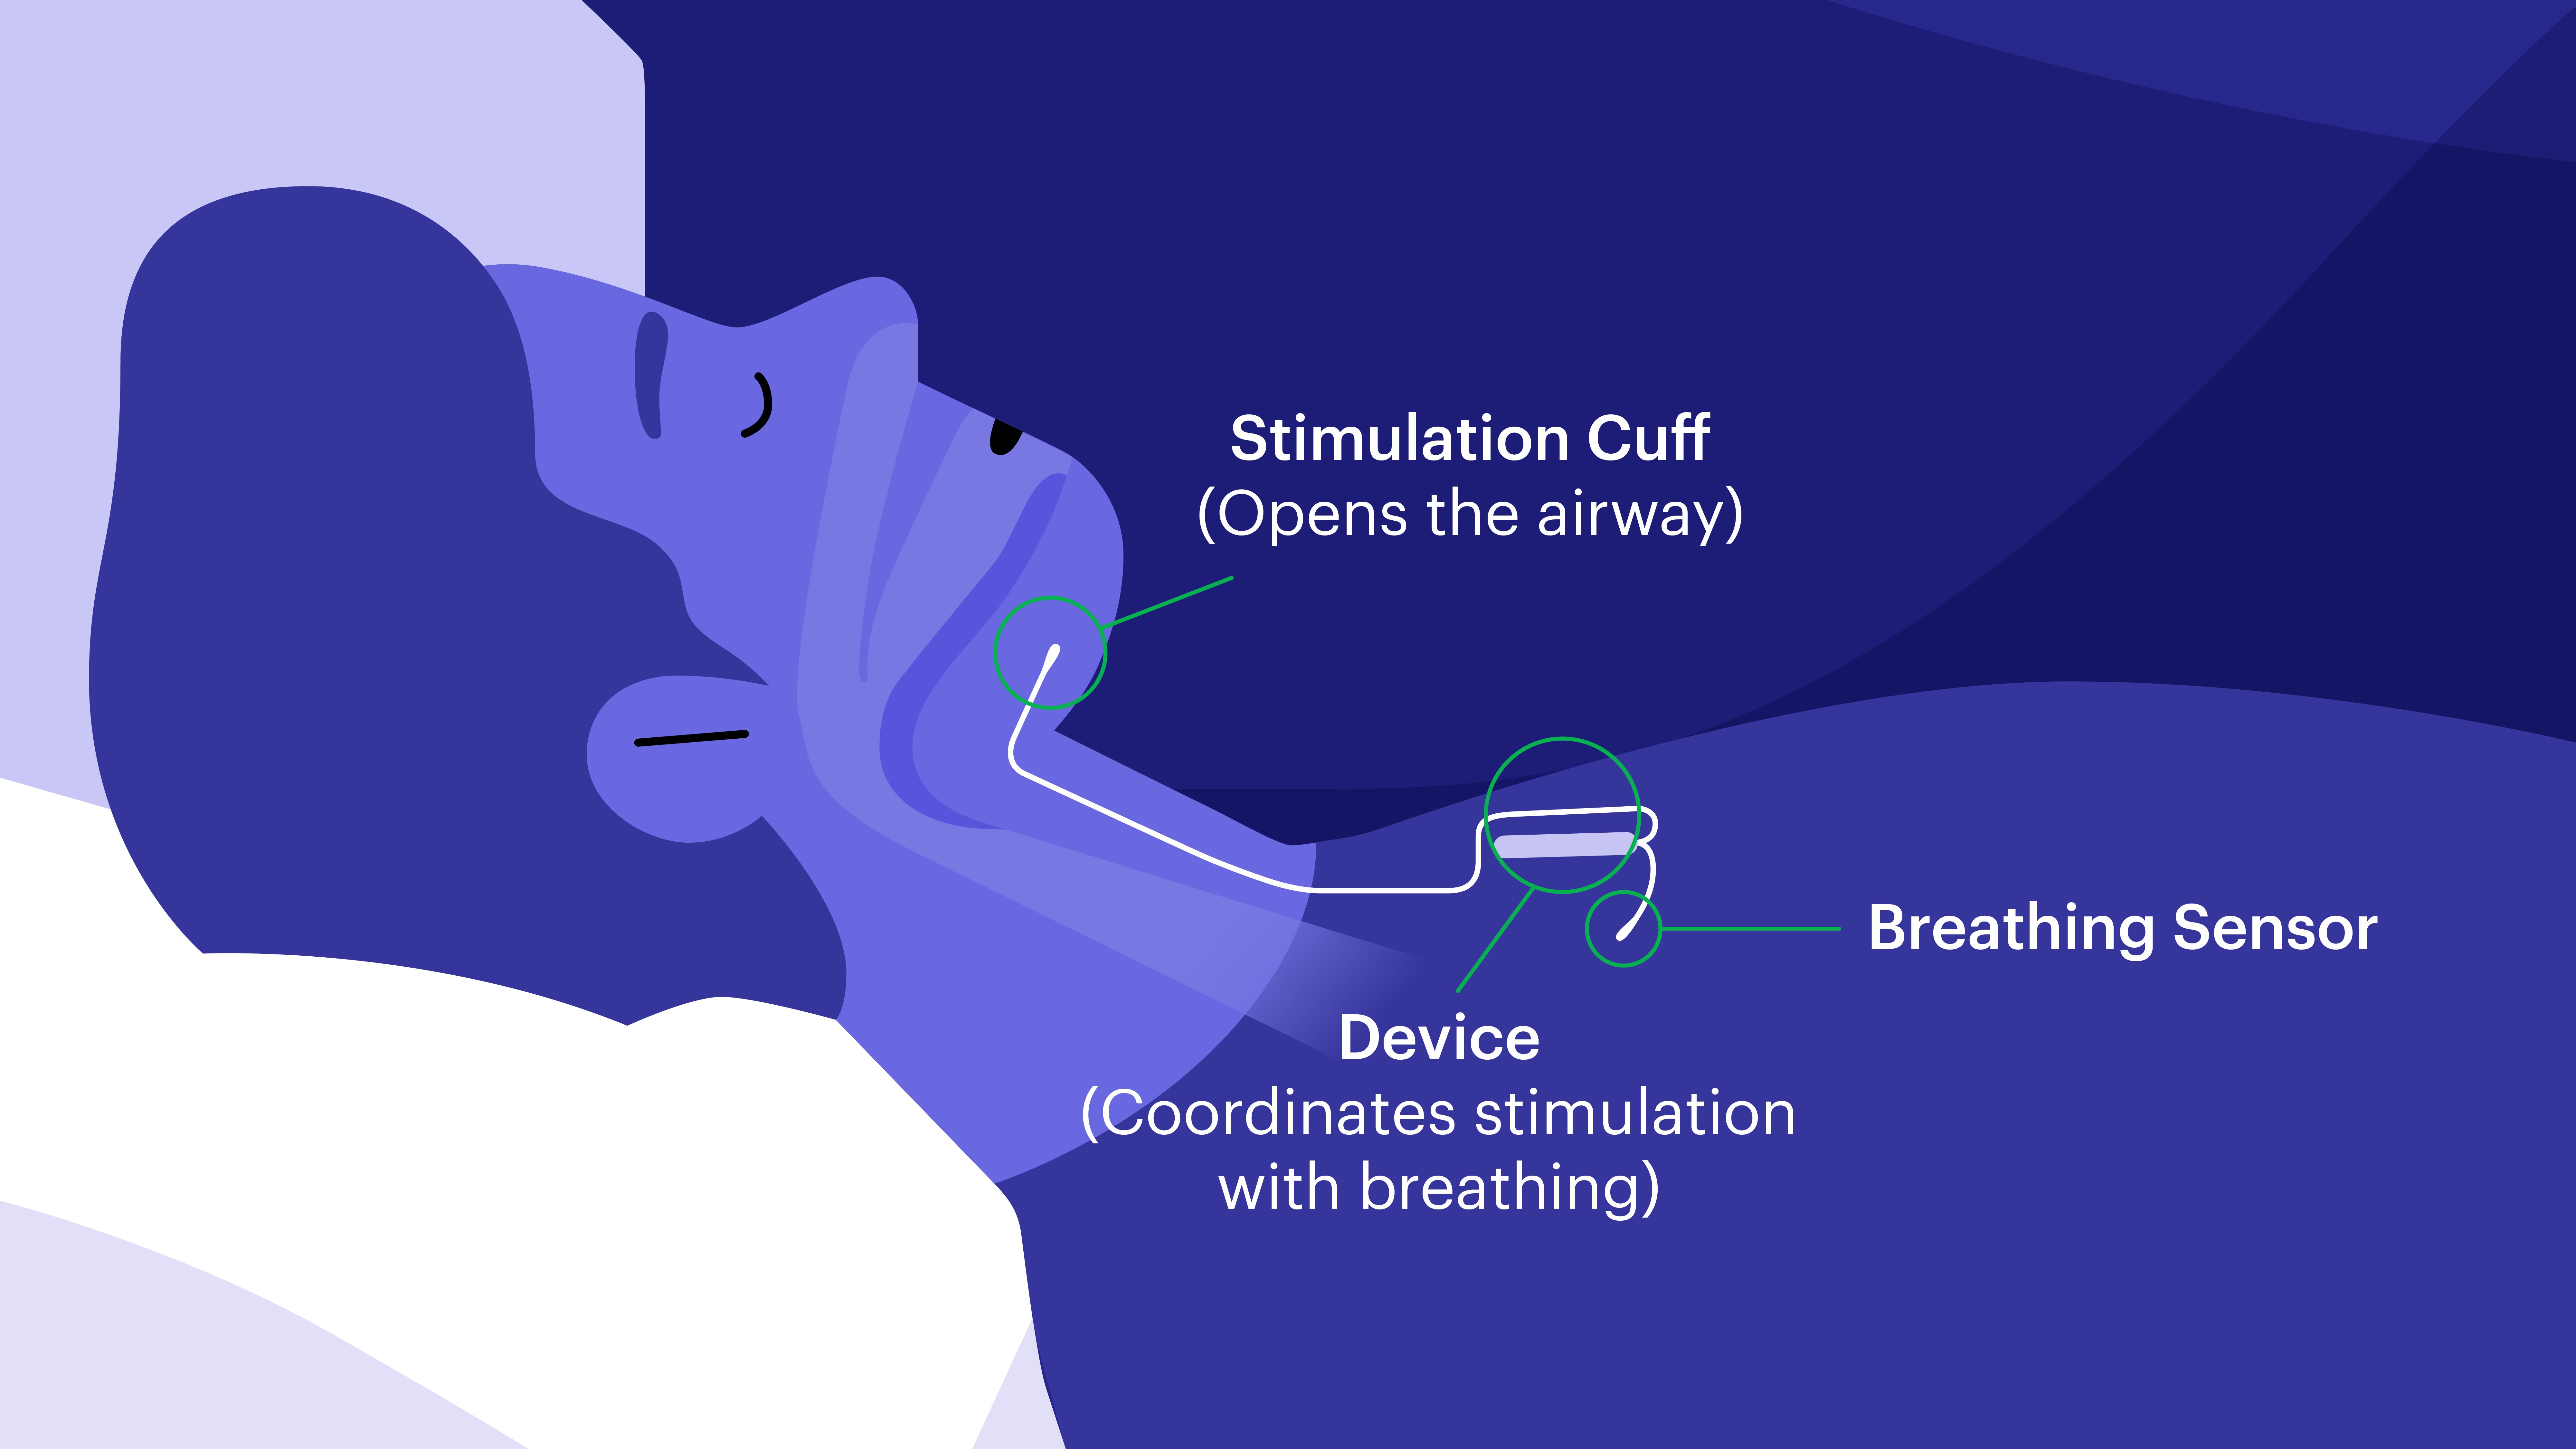 Inspire sleep technology illustration showing stimulation cuff which opens the airway, the device which coordinates stimulation with breathing, and breathing sensor